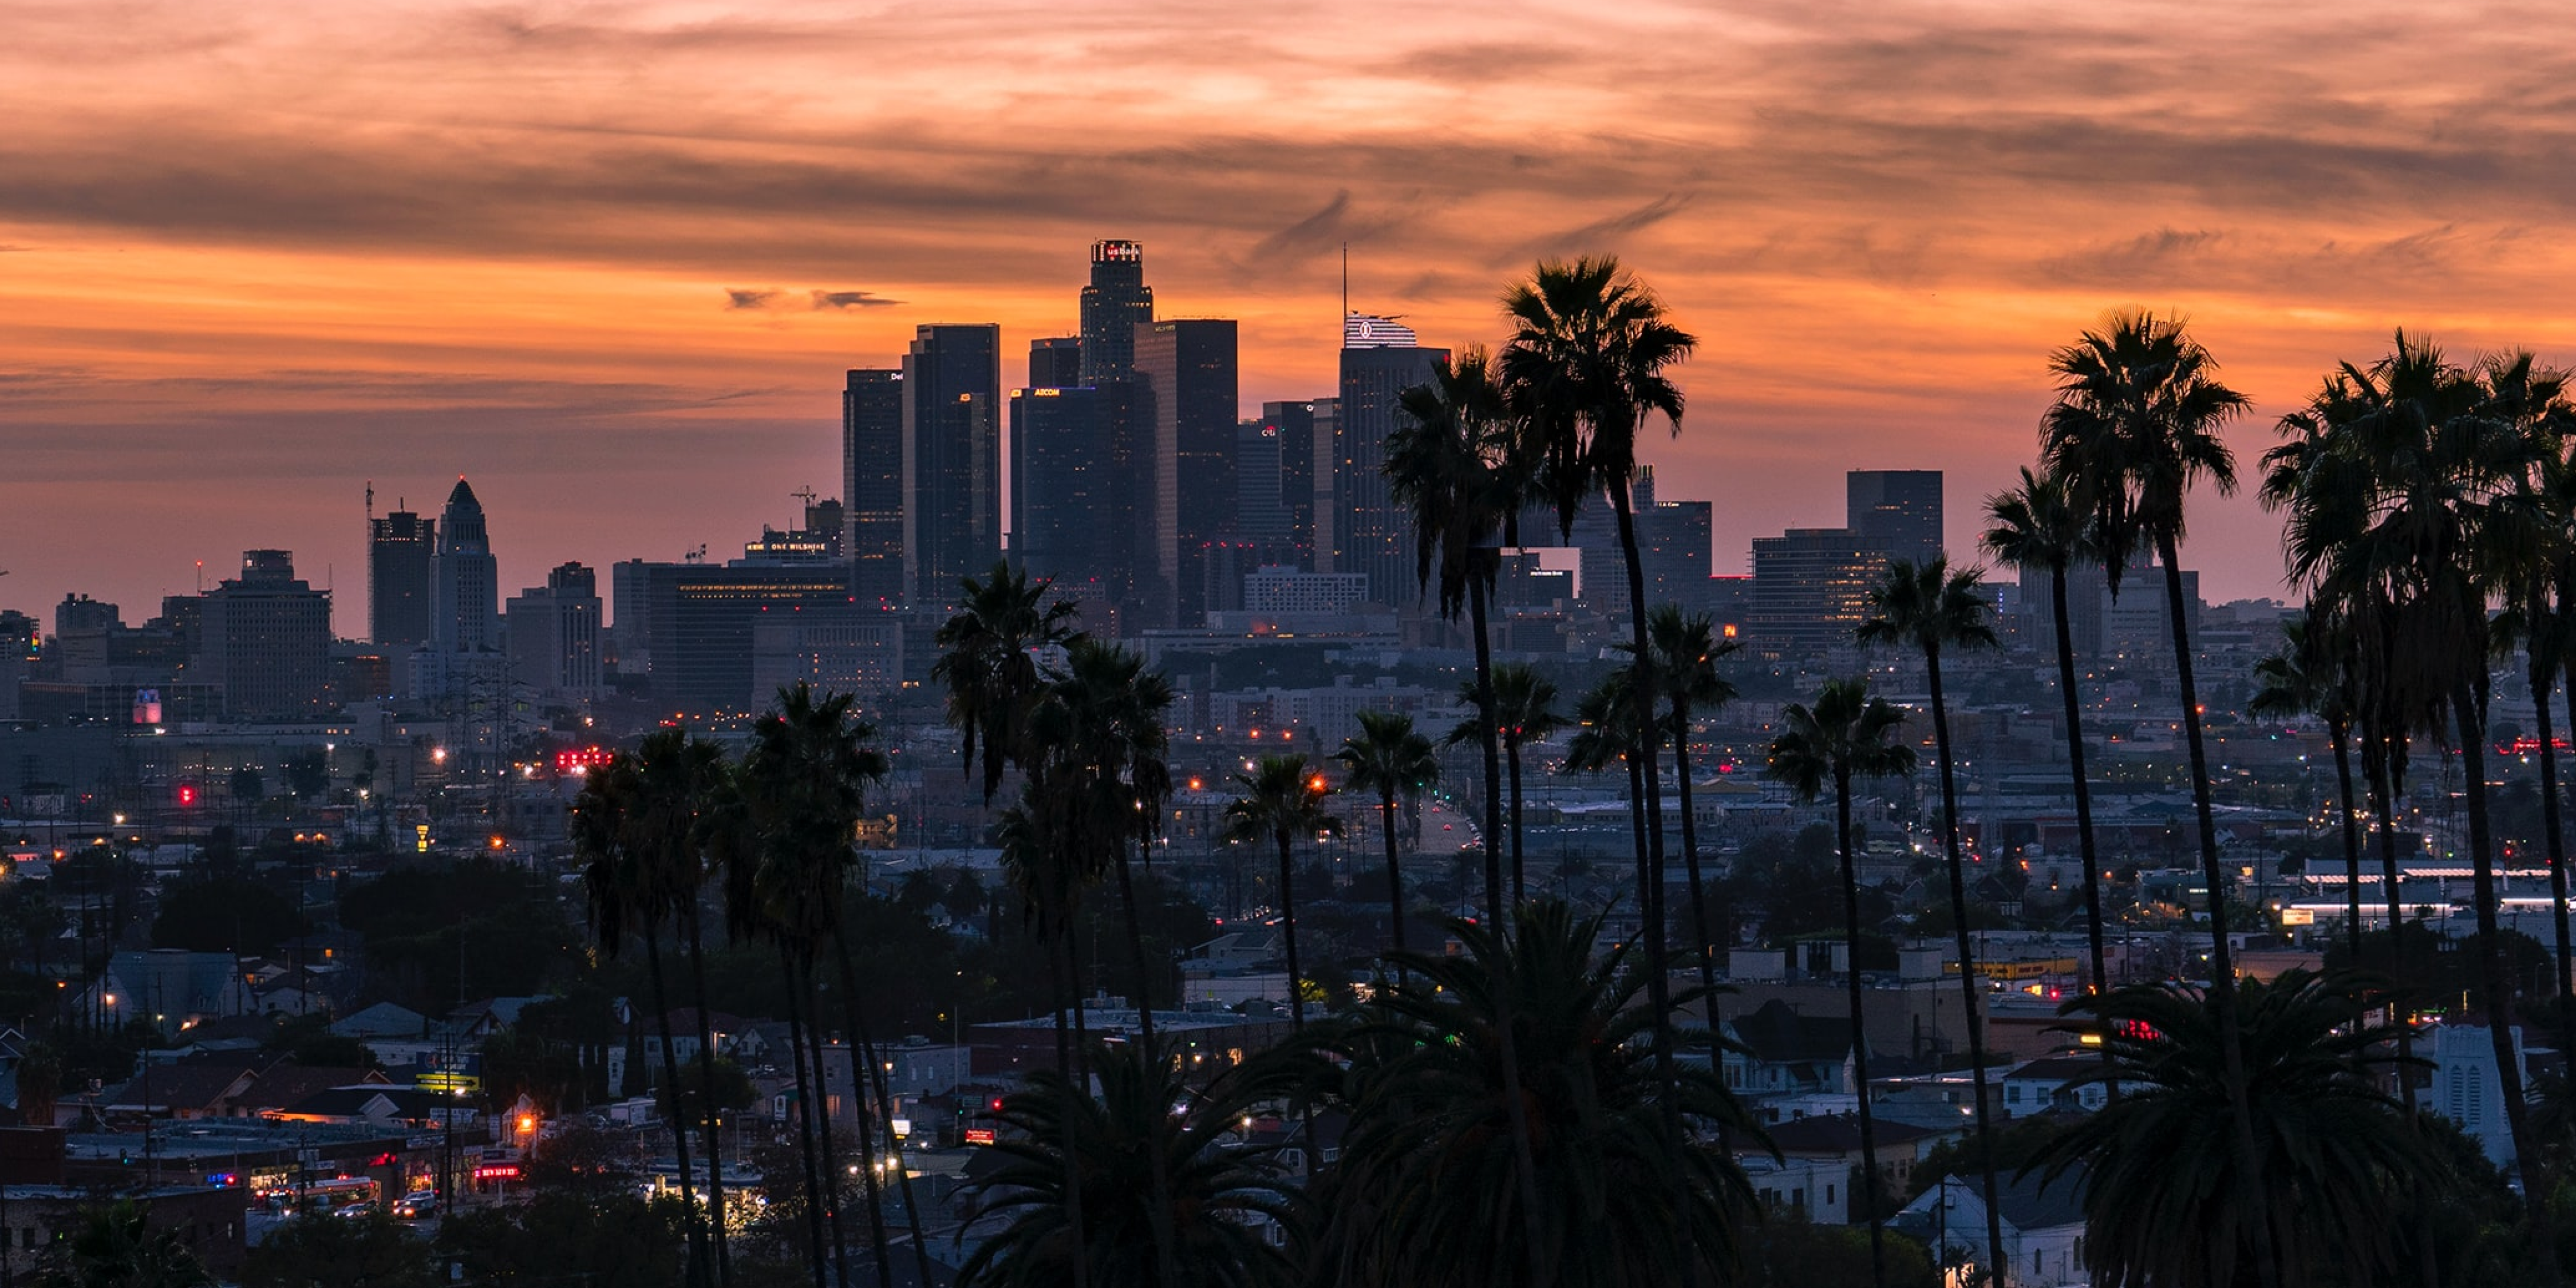 An image of the Los Angeles skyline at sunset 